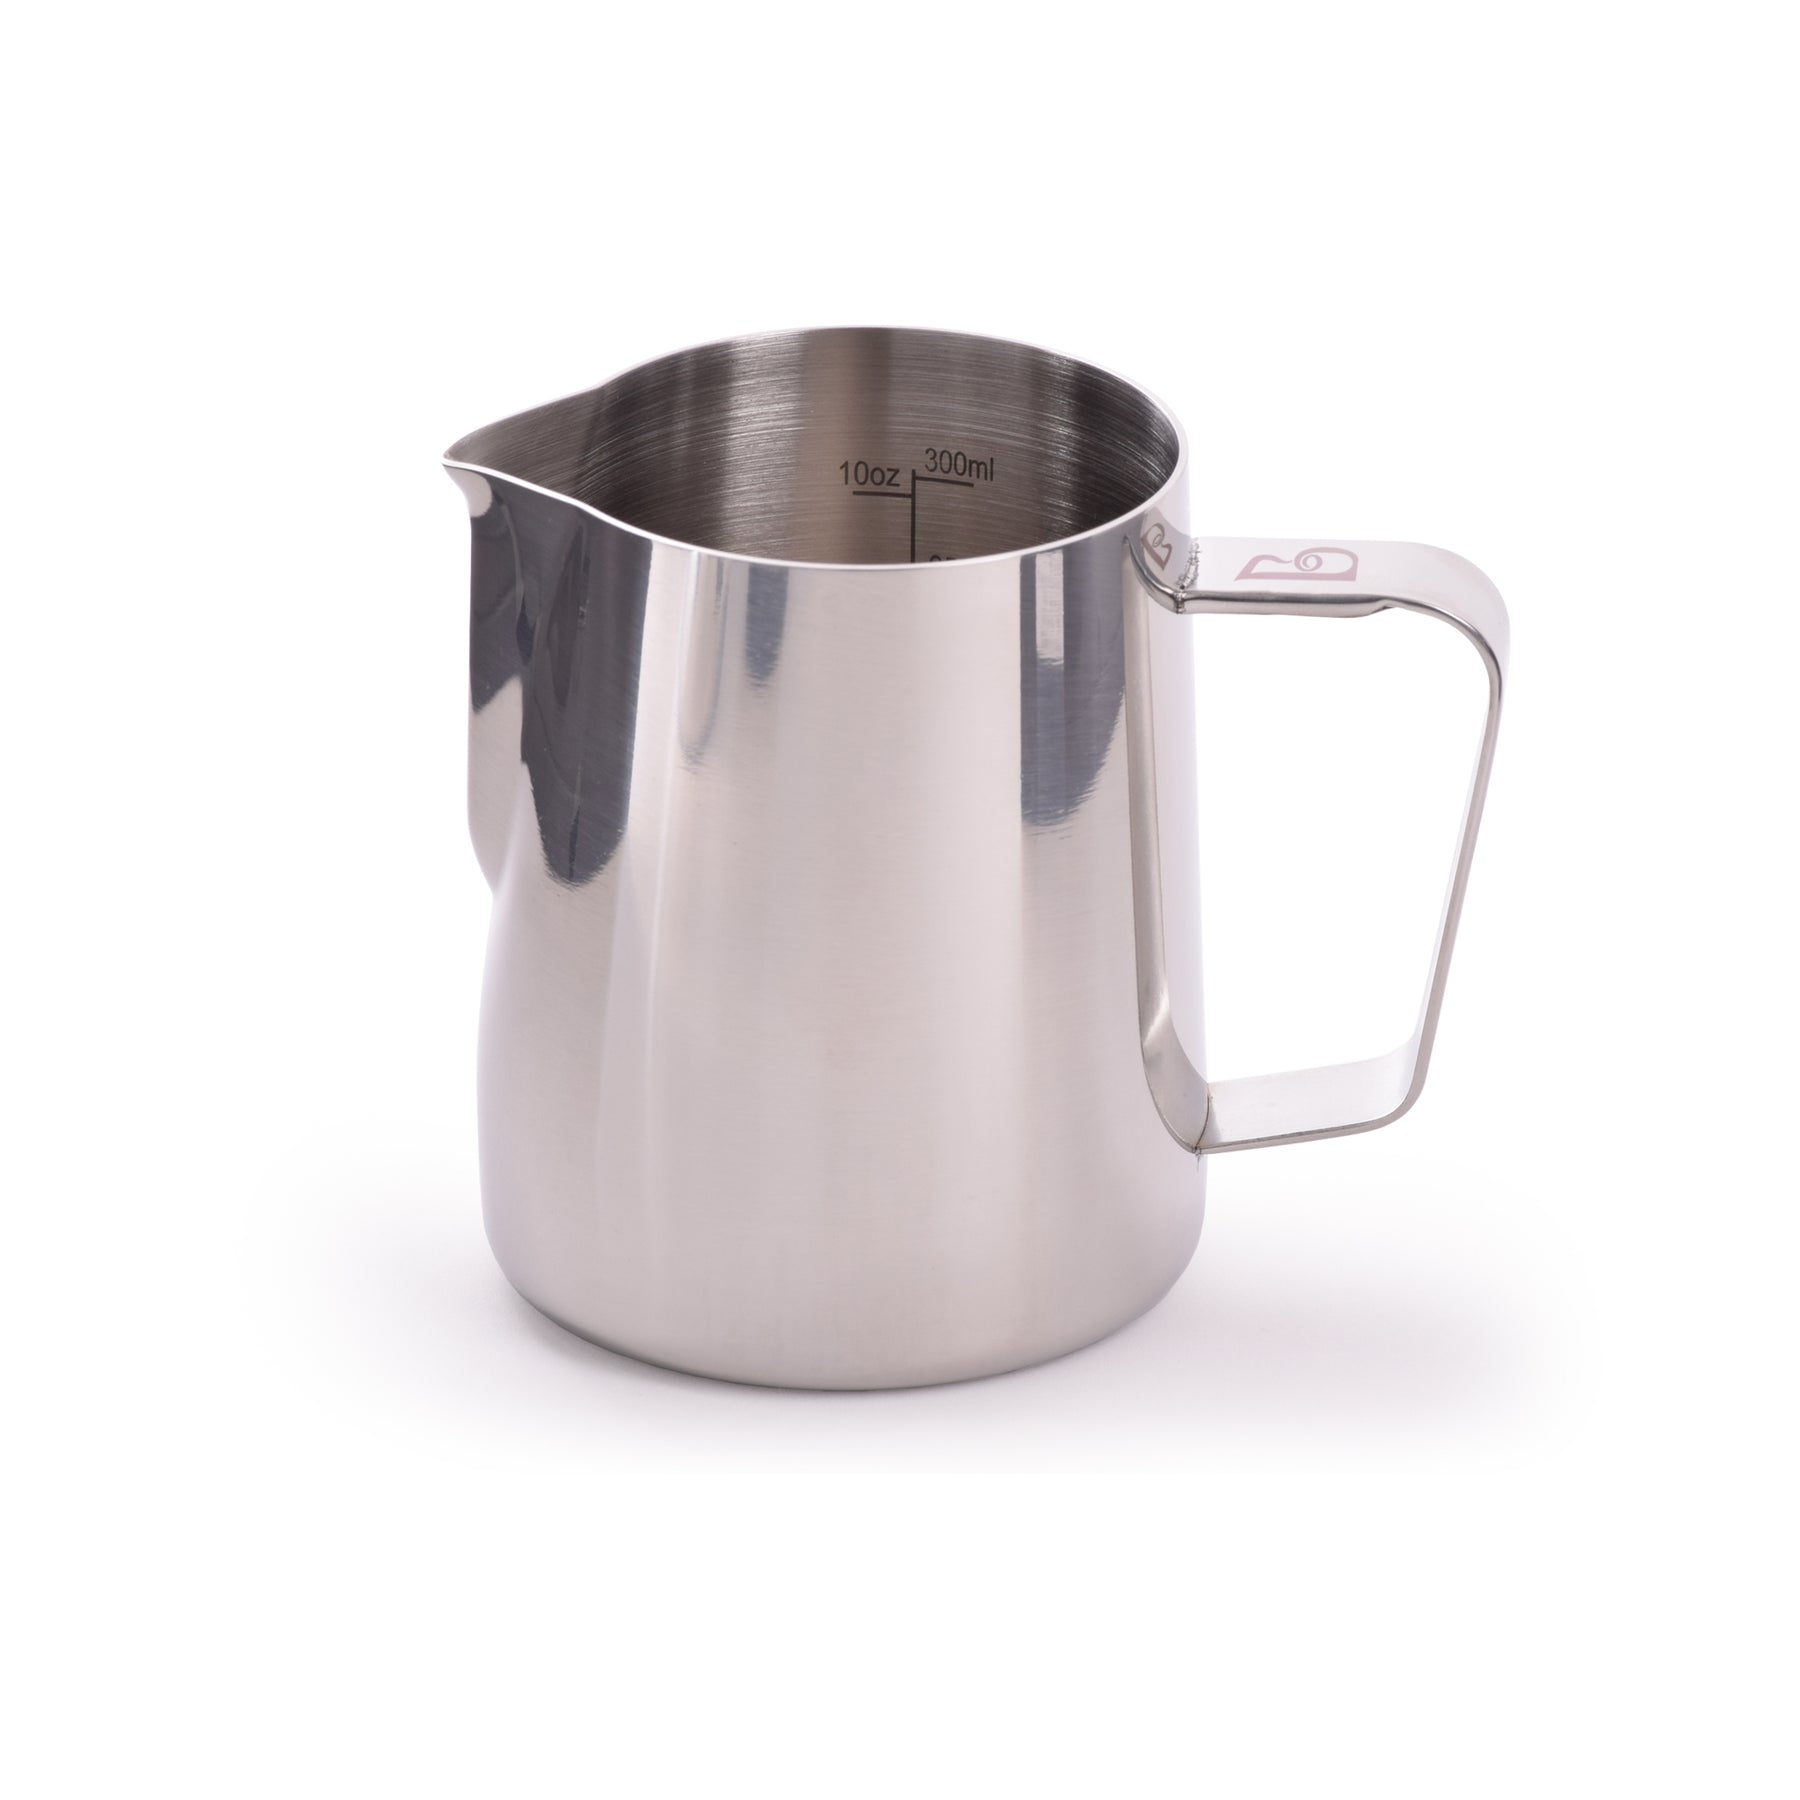 Brewista Smart Pour Precision Frothing Pitcher - 12oz Stainless Steel